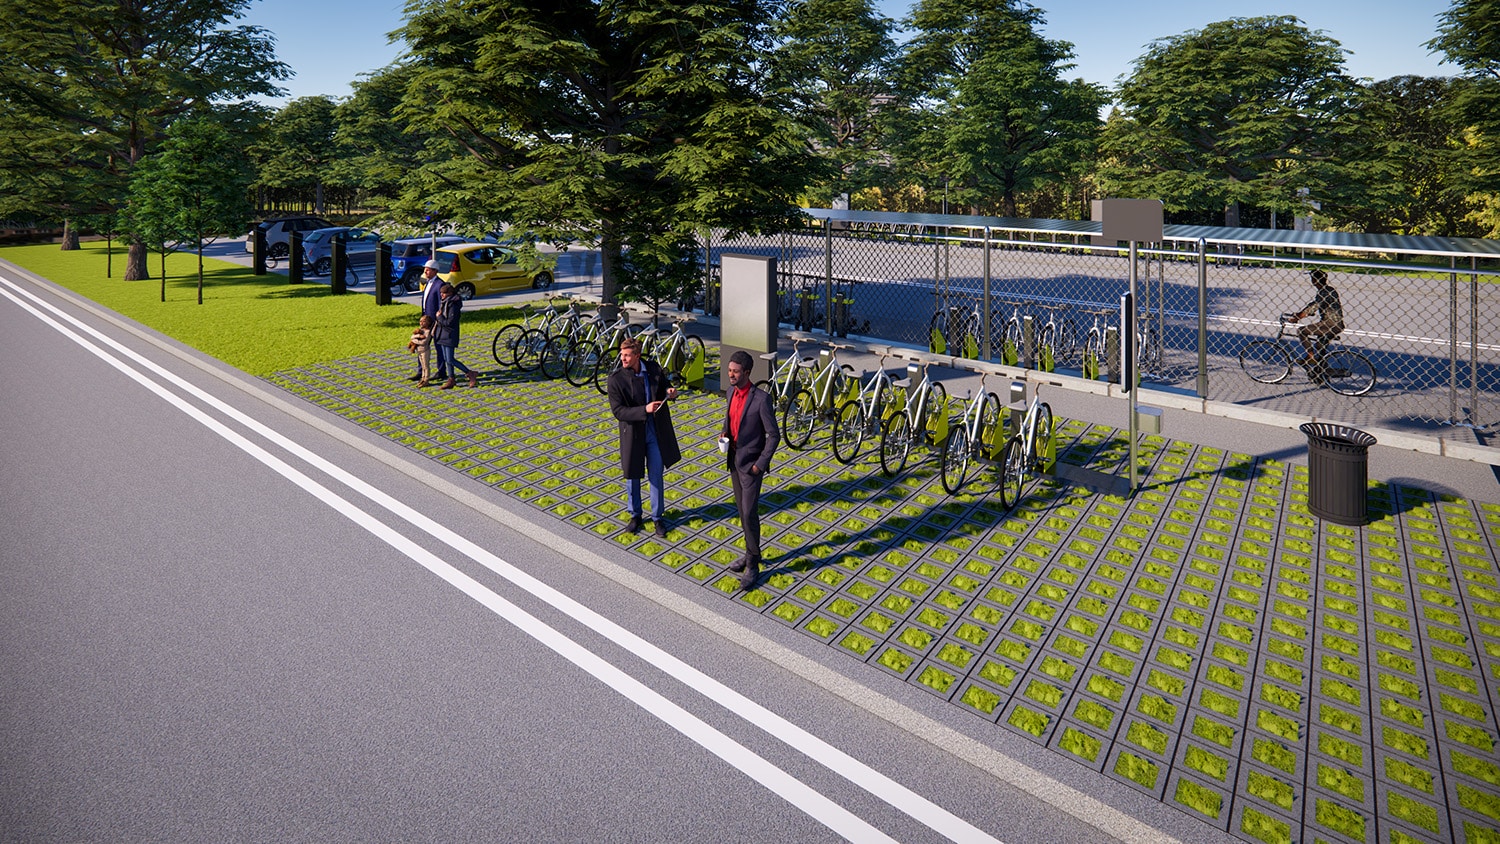 Green urban design with bike sharing, parking, and pedestrians in a sunny setting.